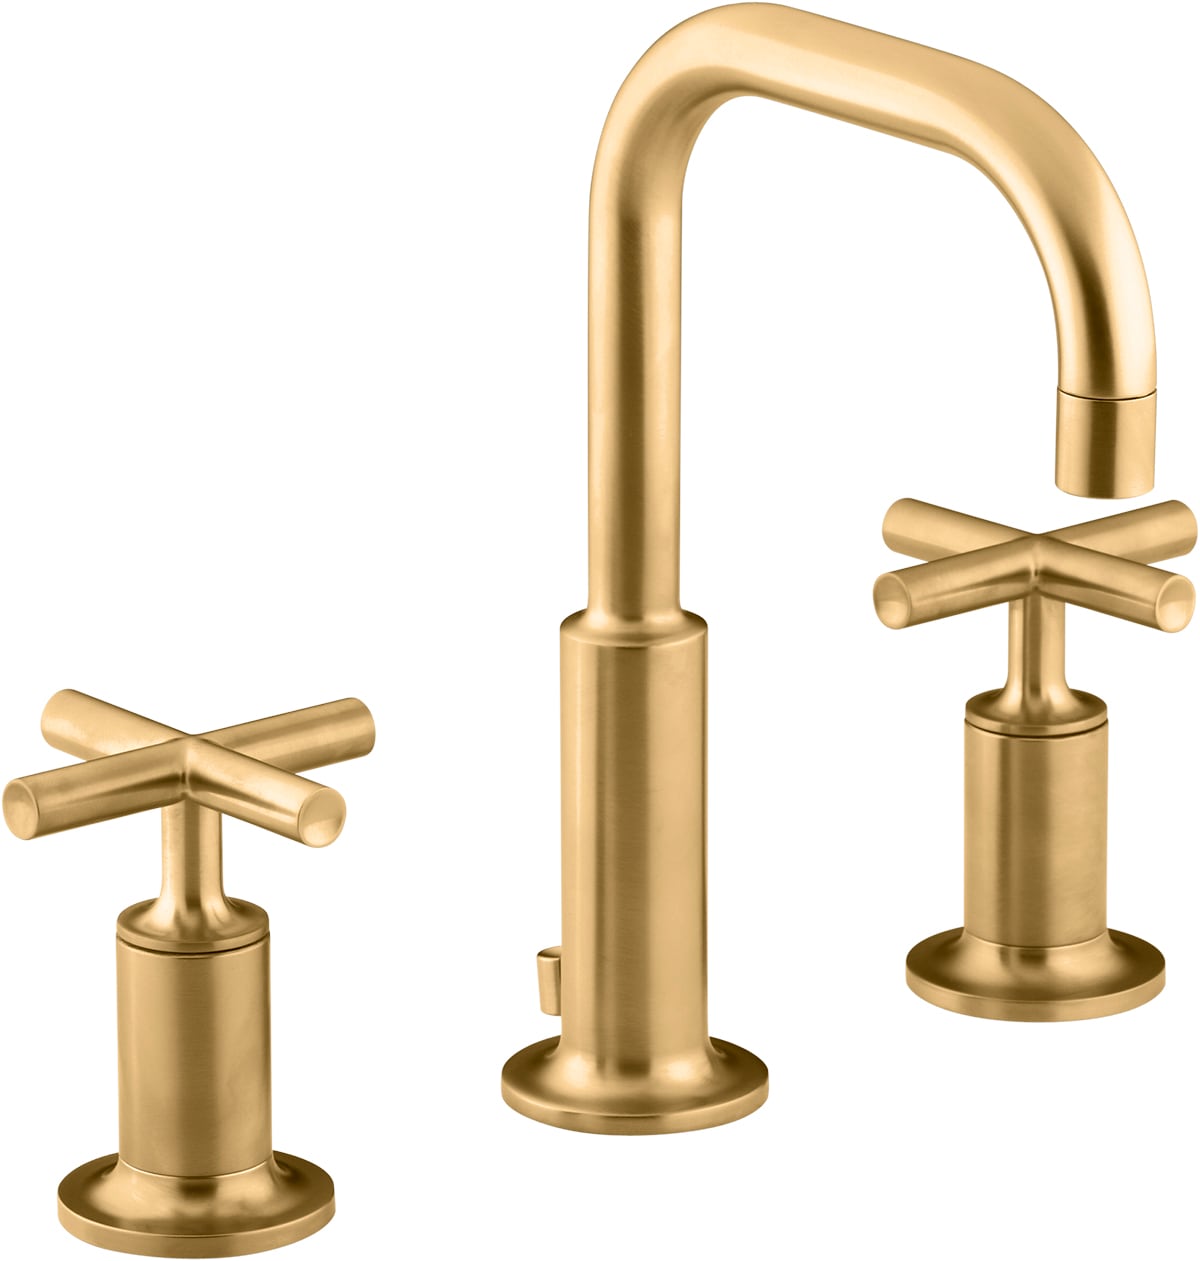 Brass Bathroom Faucets & Shower Heads at